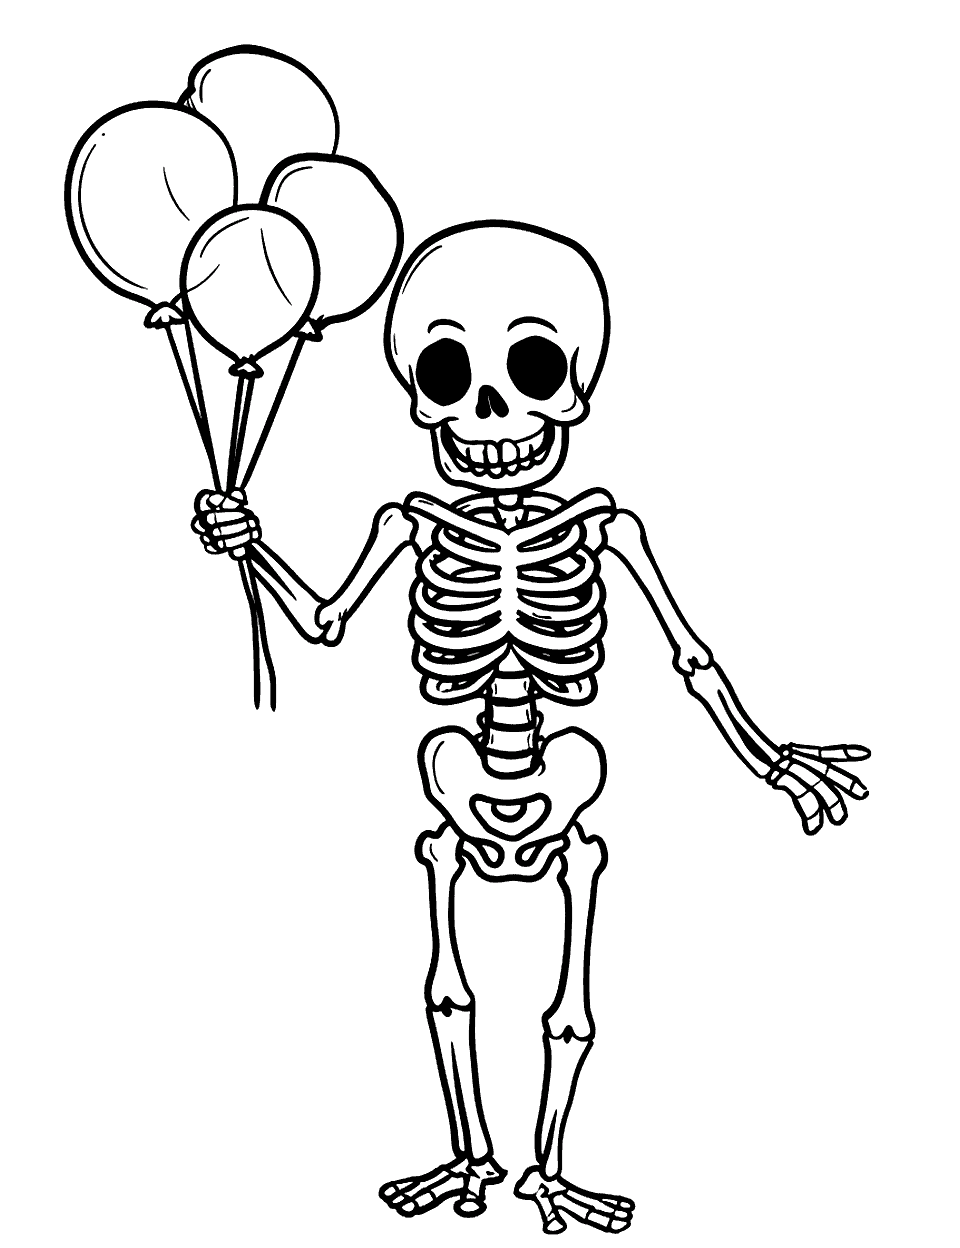 Happy Skeleton with Balloons Coloring Page - A happy skeleton holding a bunch of balloons.